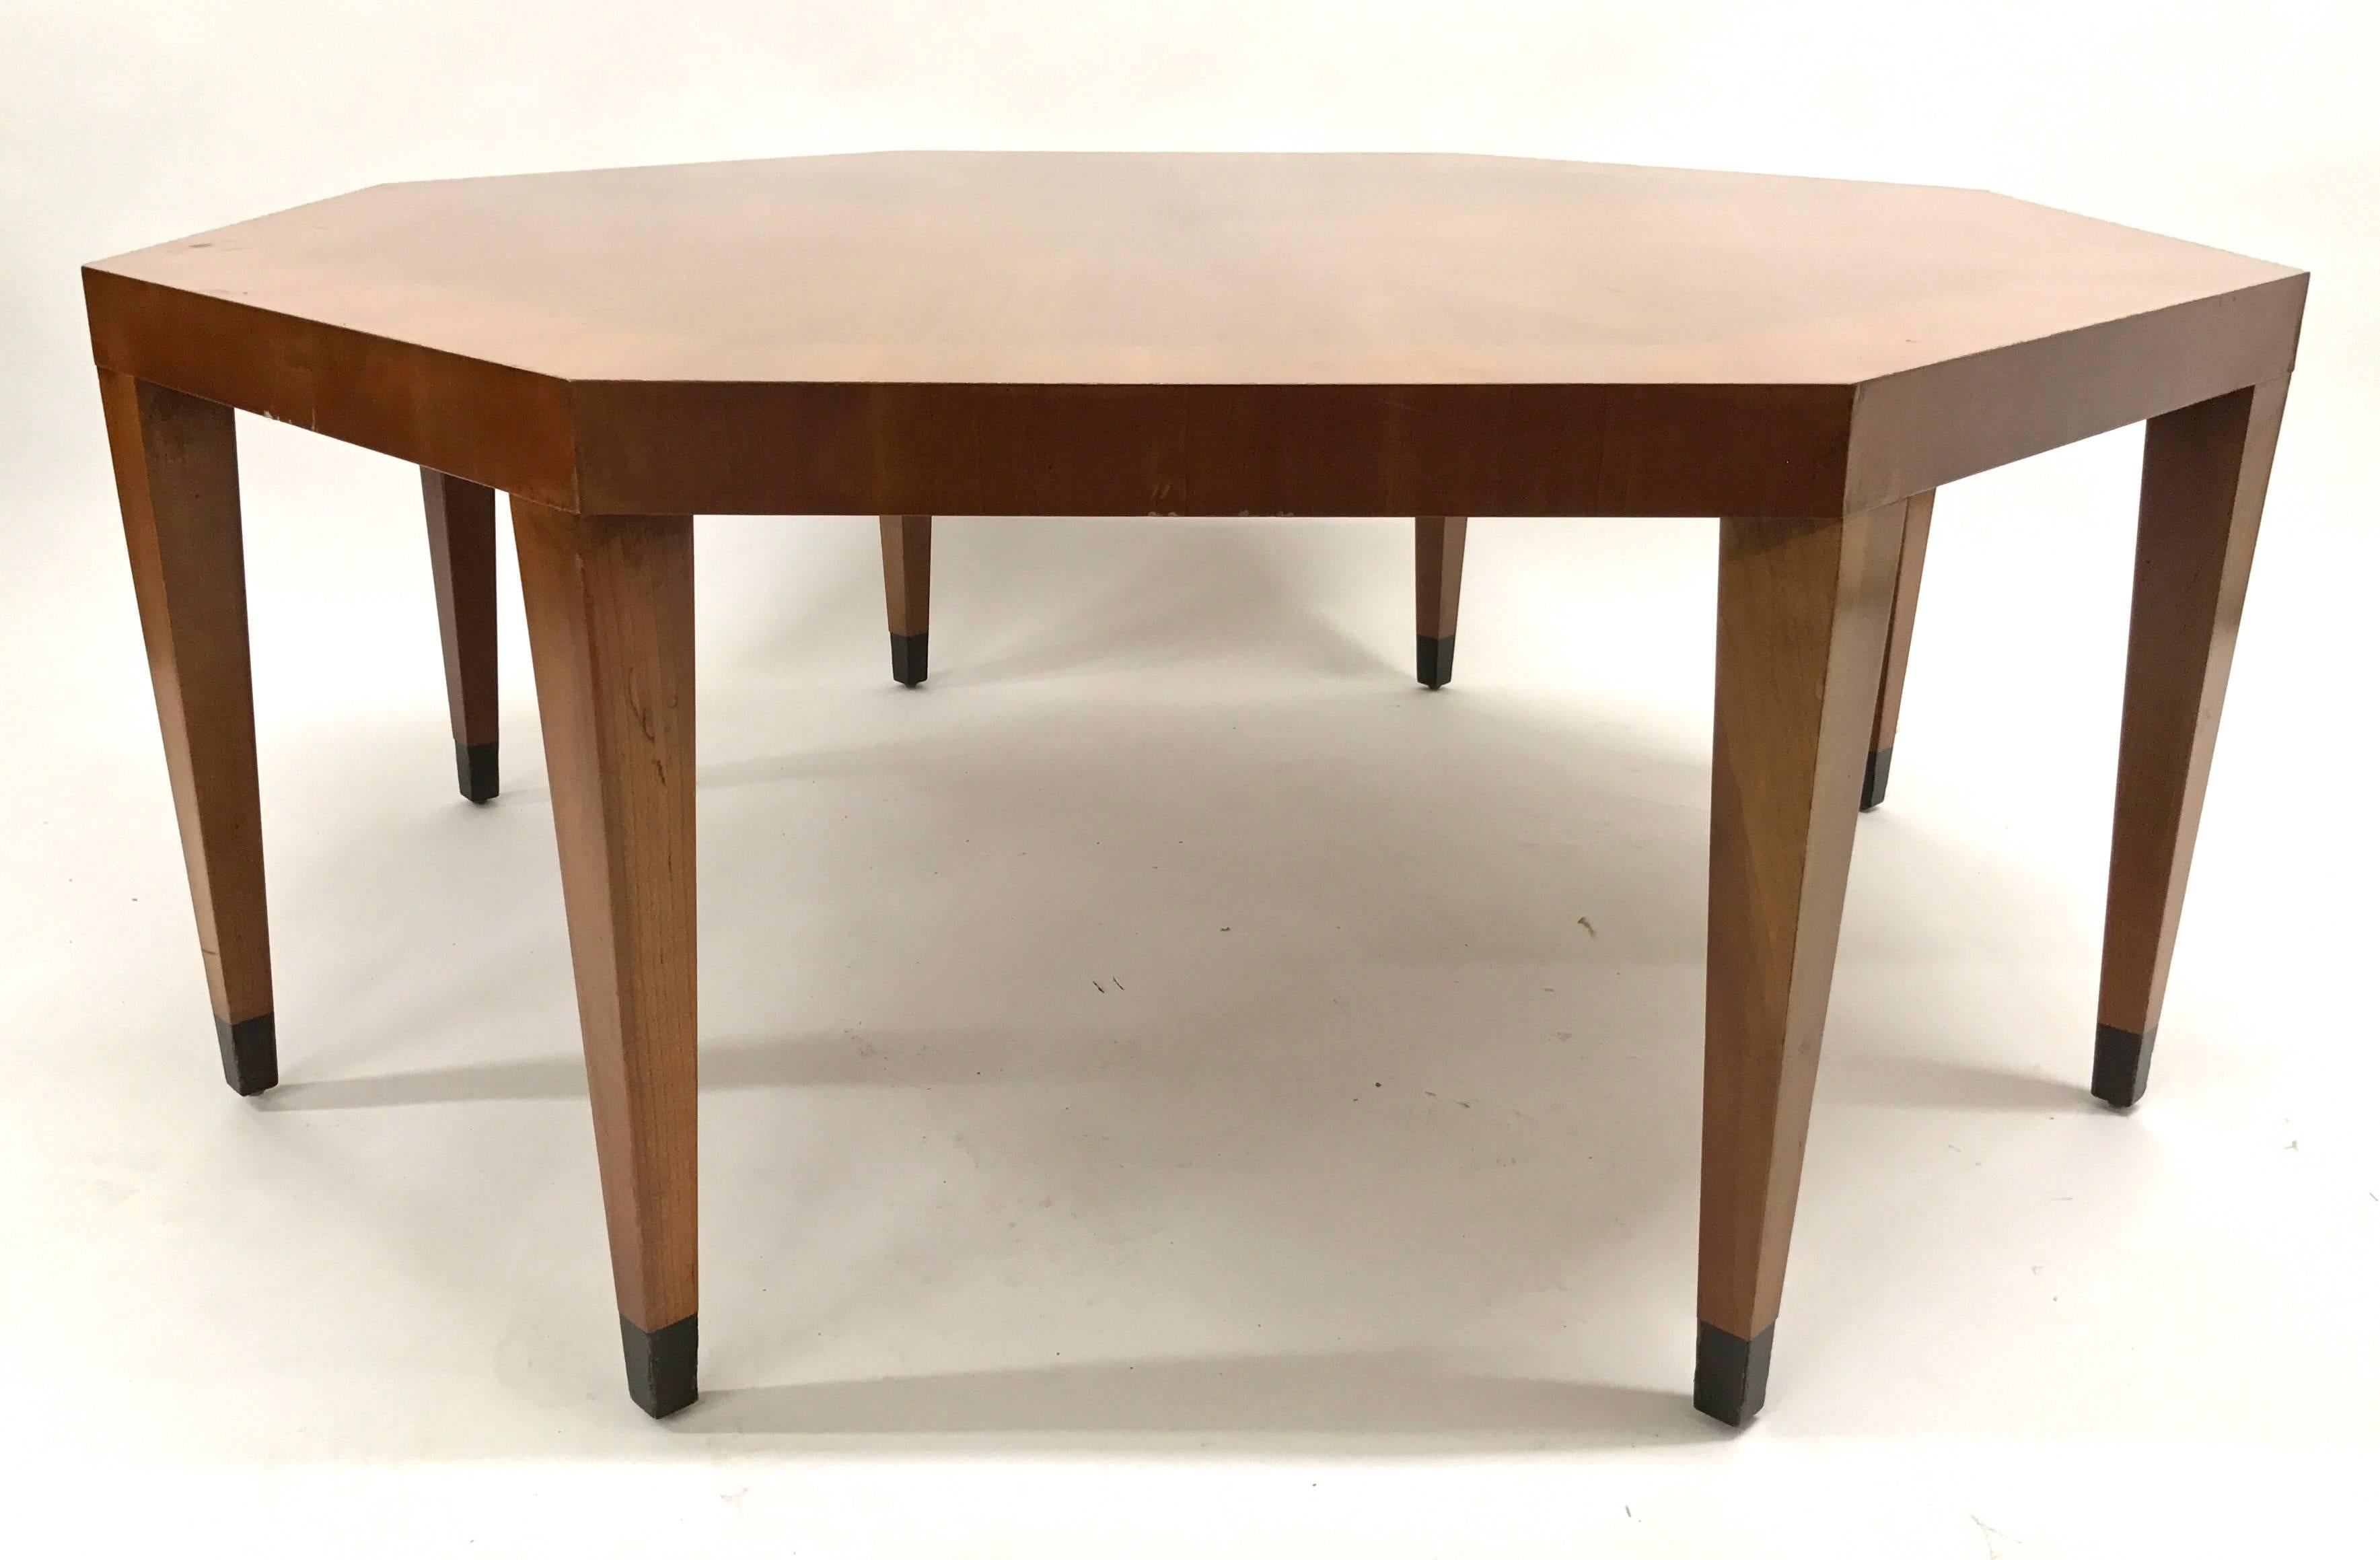 Baker Octagonal Coffee Table In Good Condition For Sale In Lake Success, NY